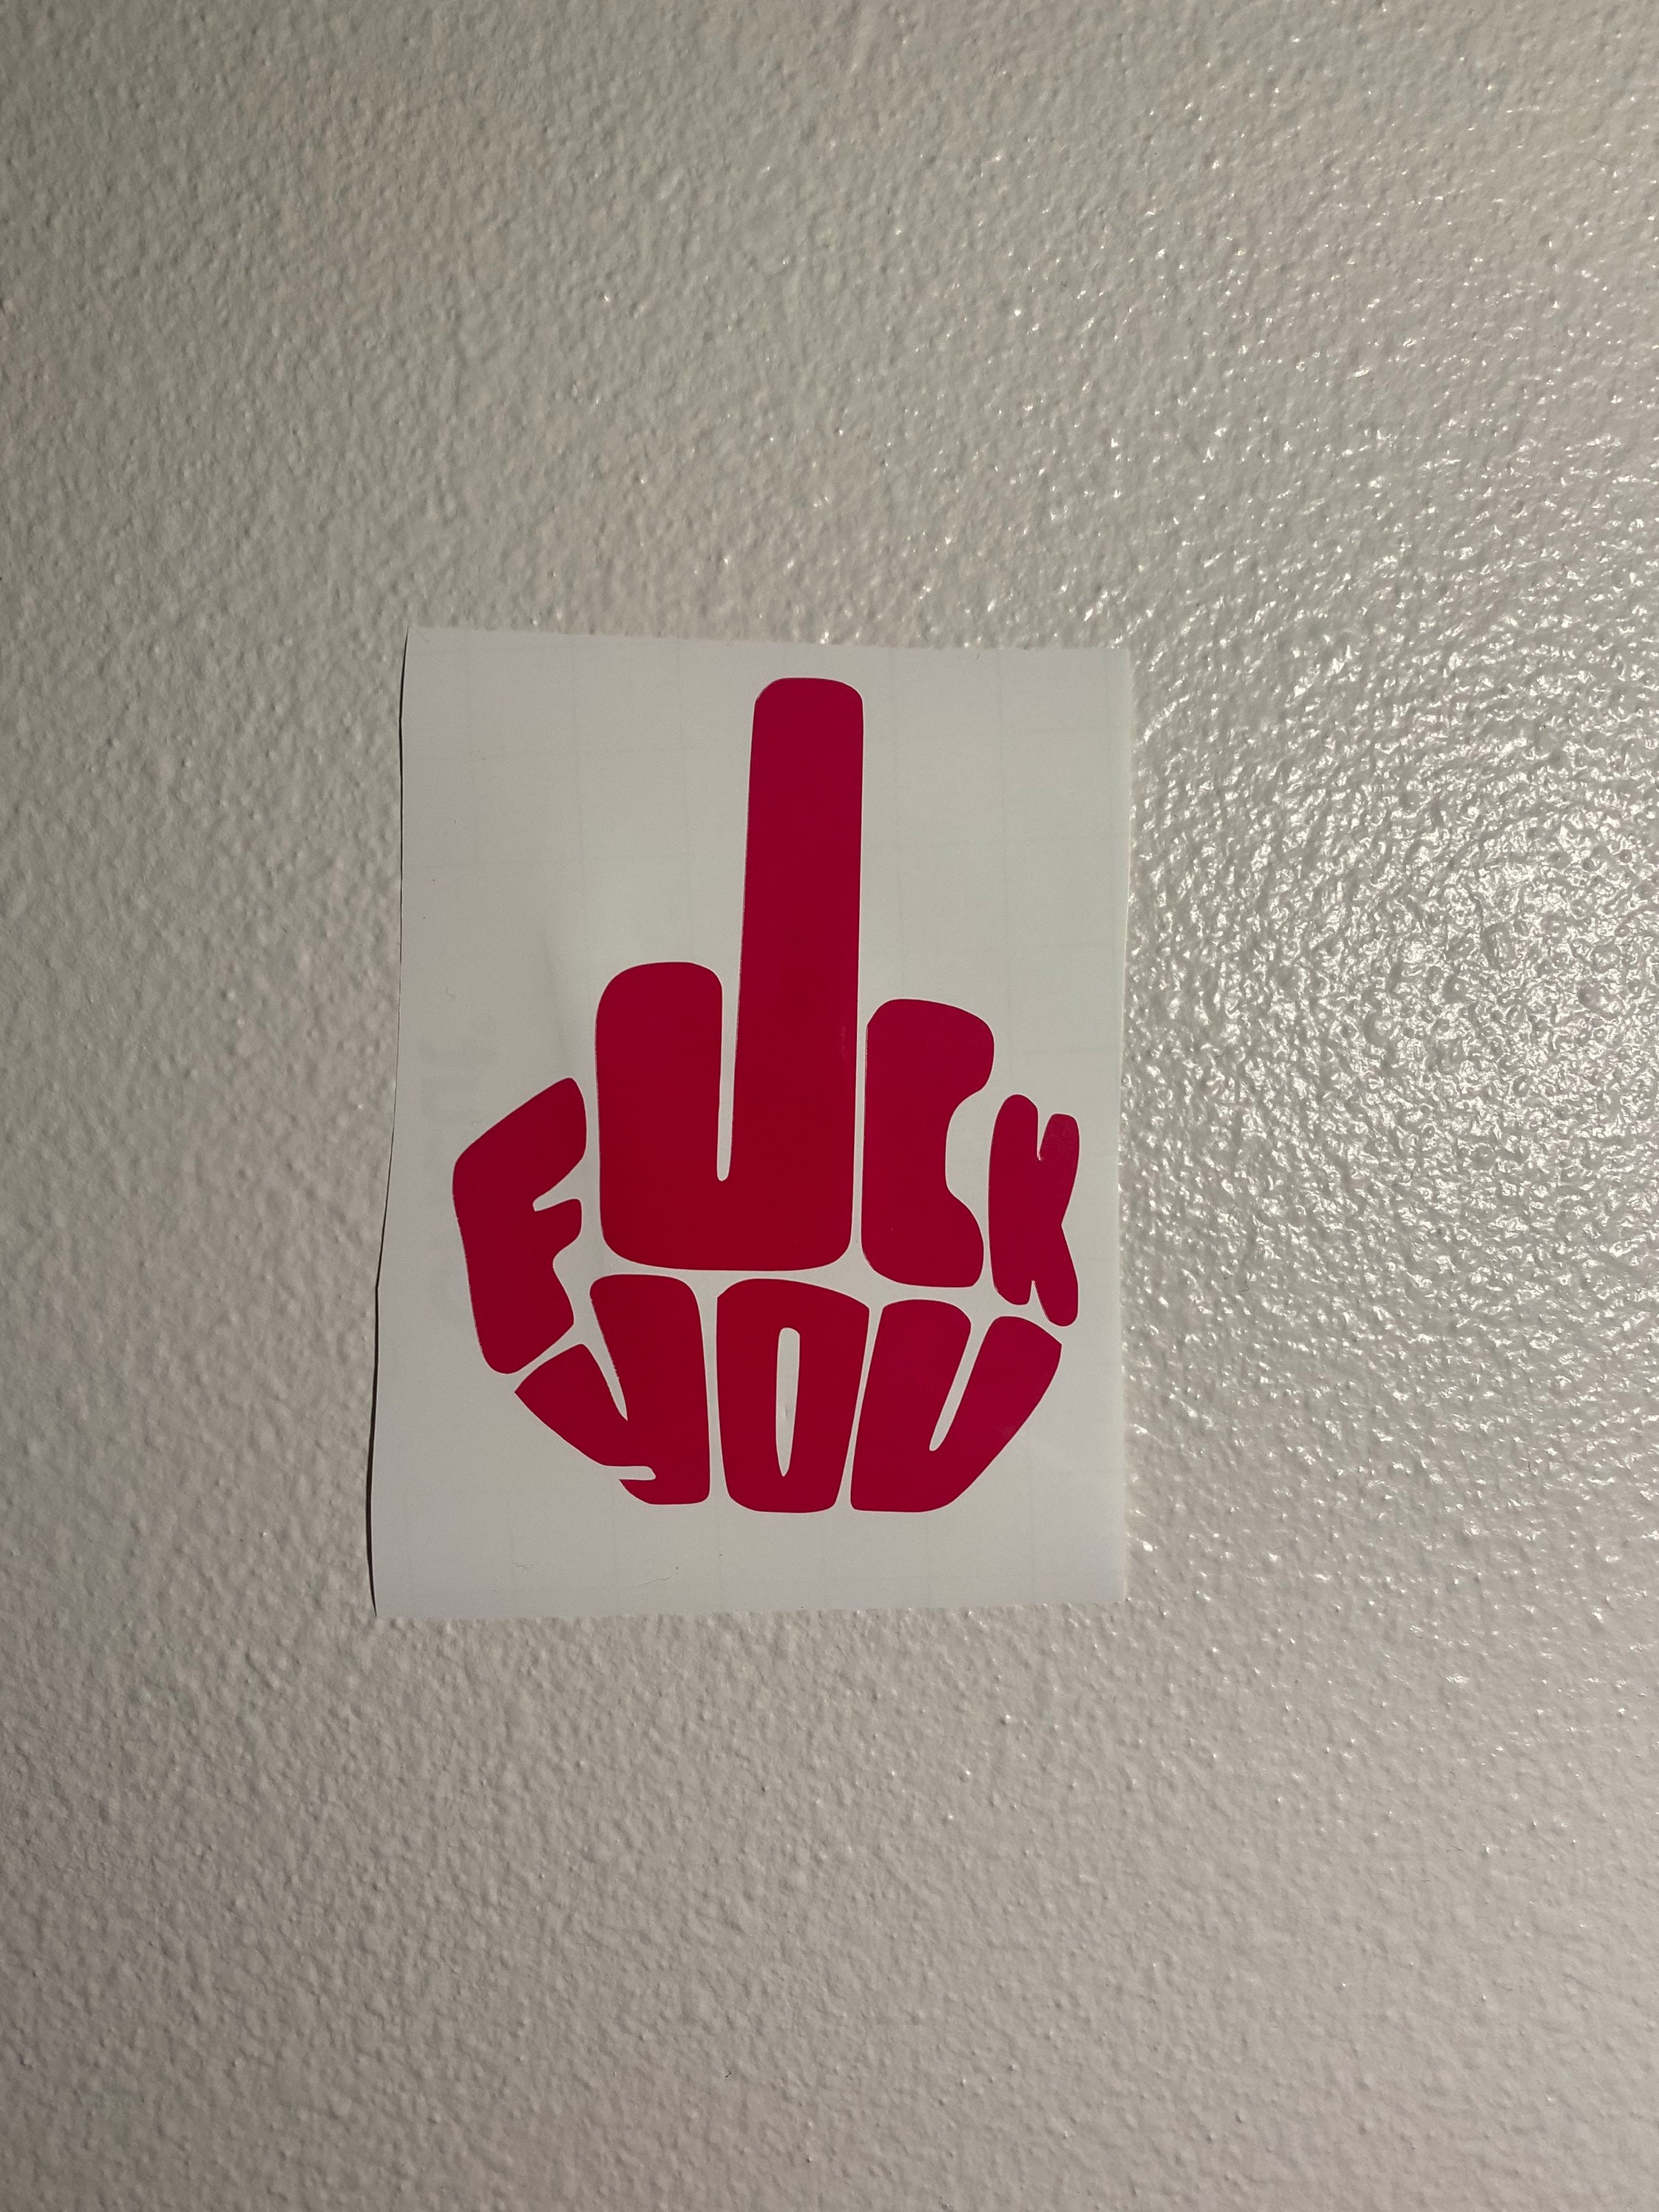 Middle Finger Fuck You Sticker Decal 